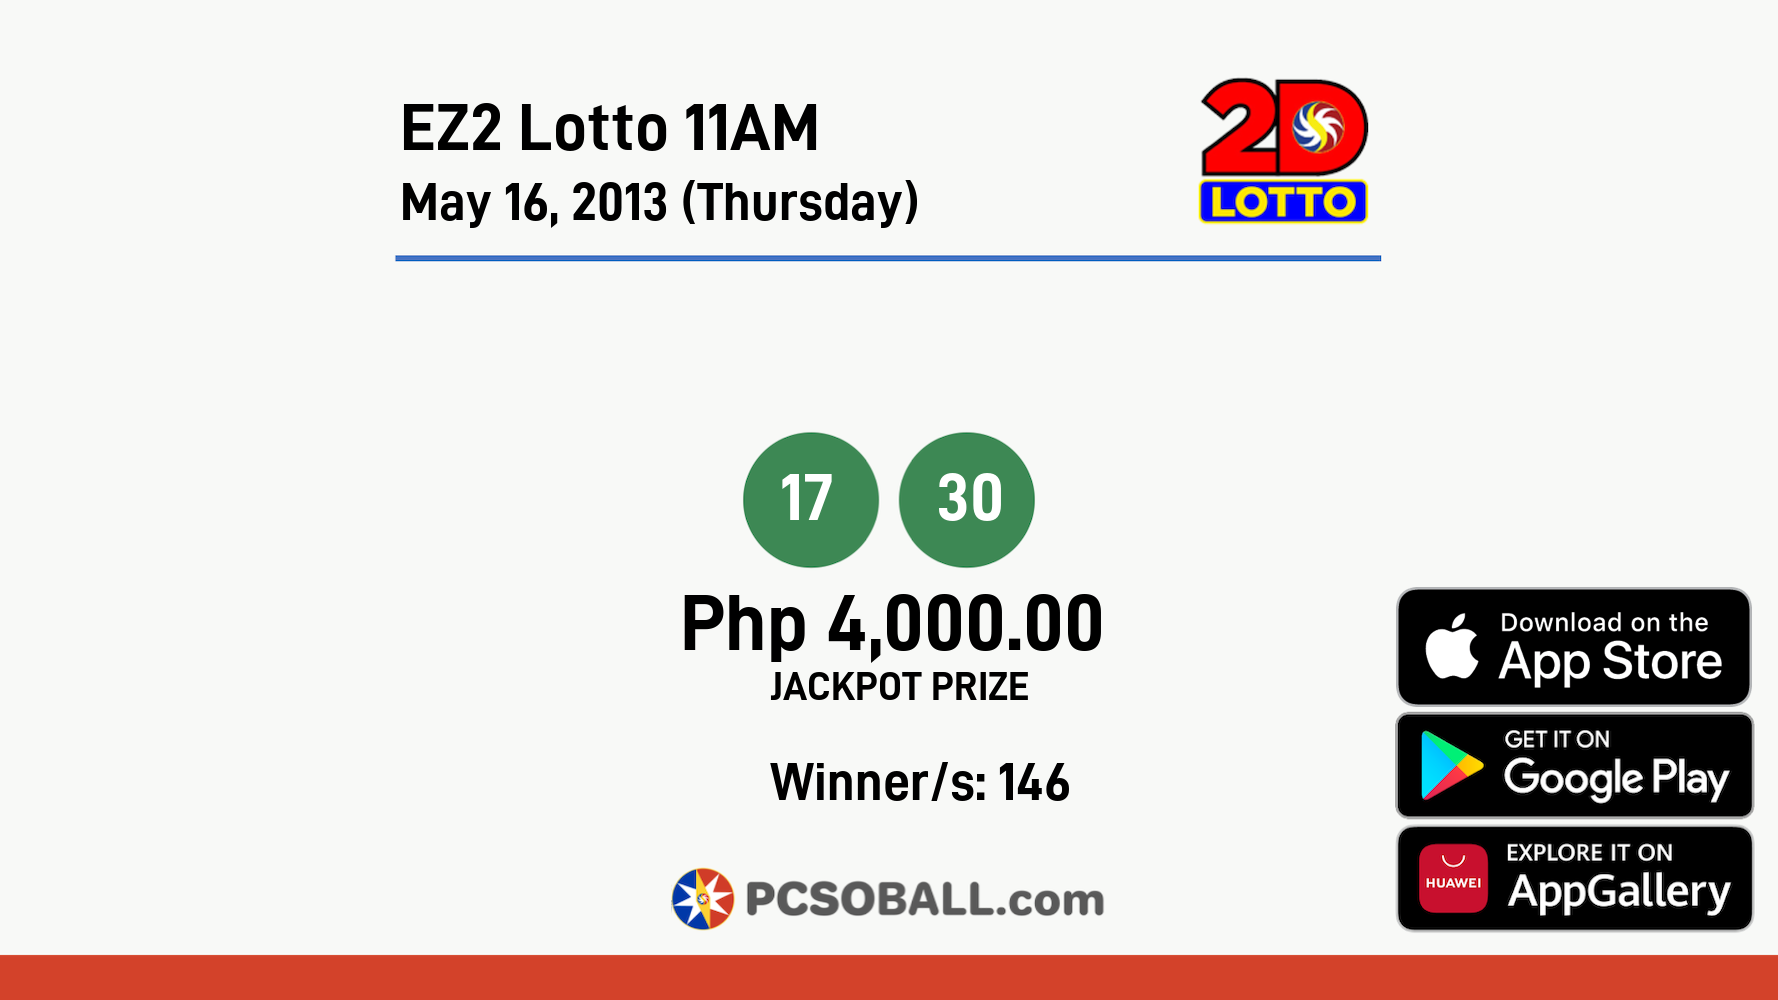 EZ2 Lotto 11AM May 16, 2013 (Thursday) Result